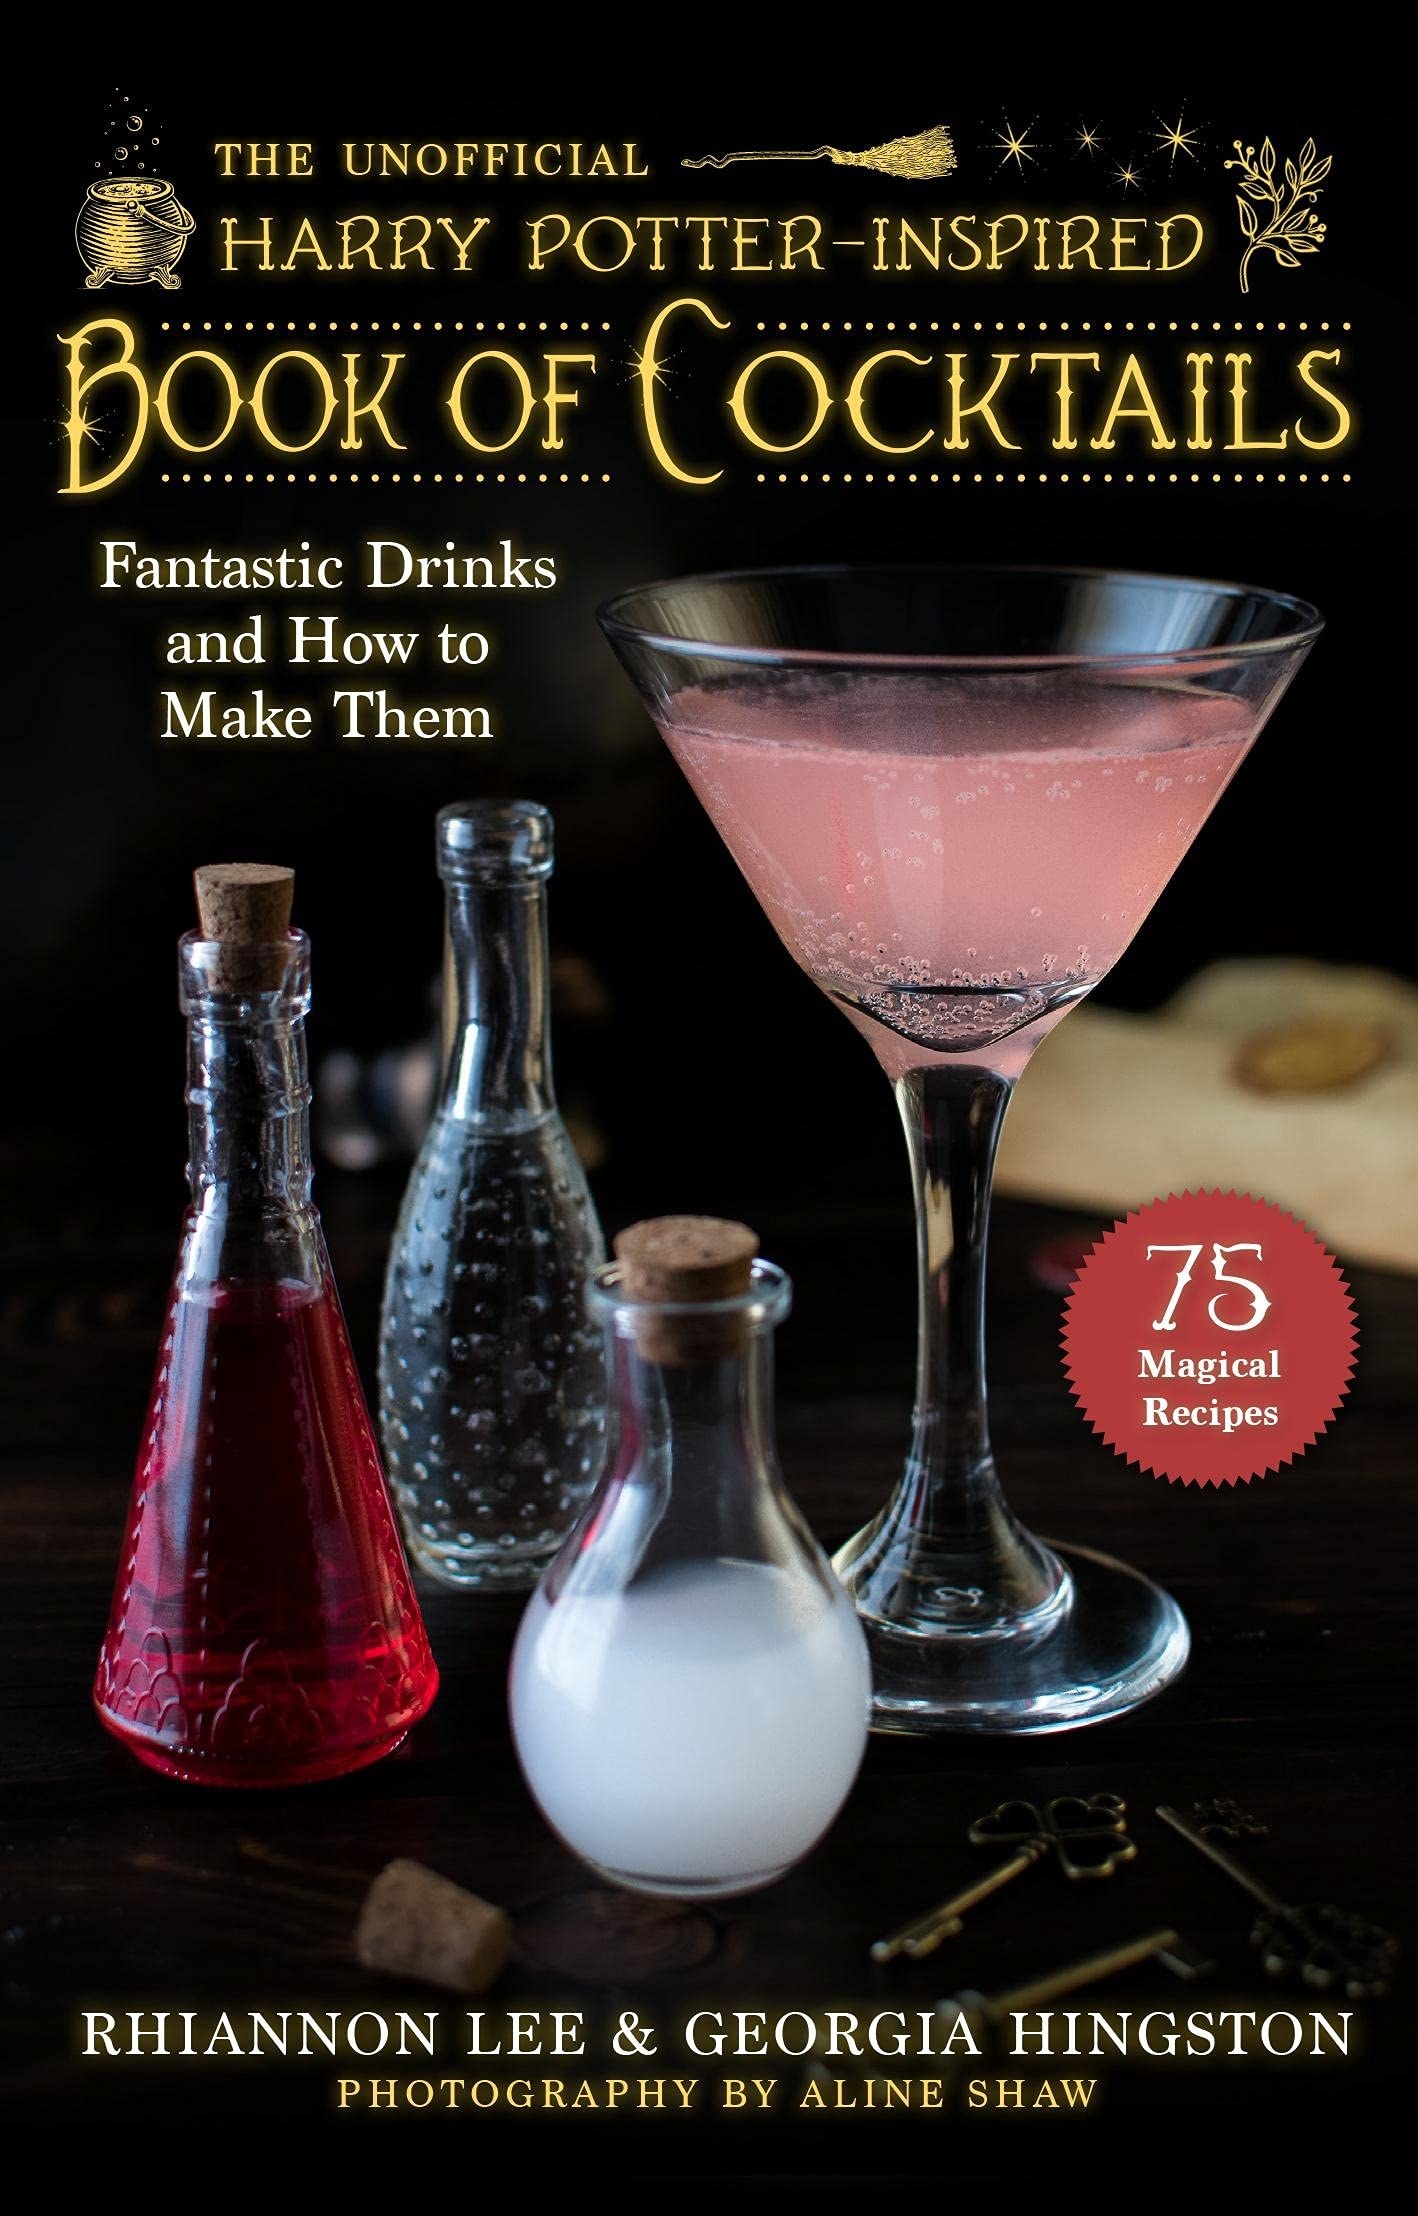 book cover with potions look of cocktails